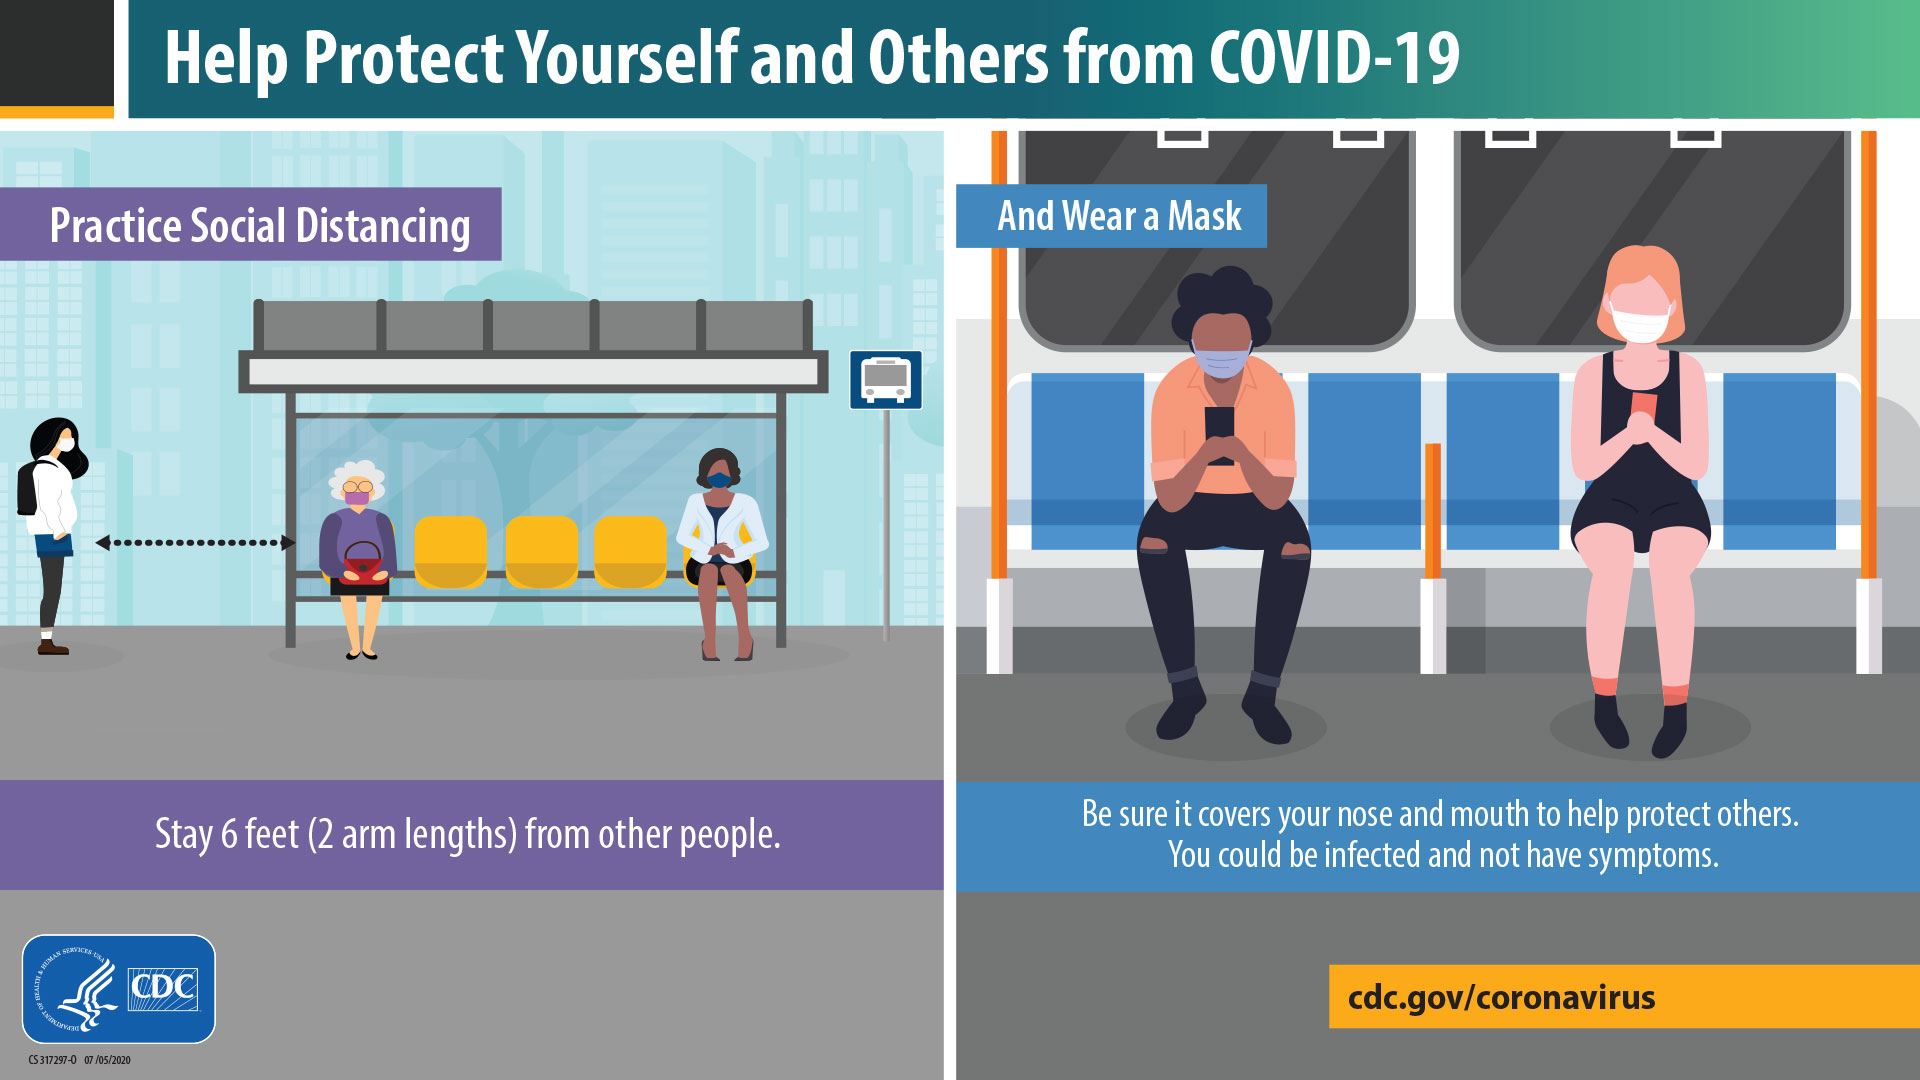 Help protect yourself and others from COVID-19.